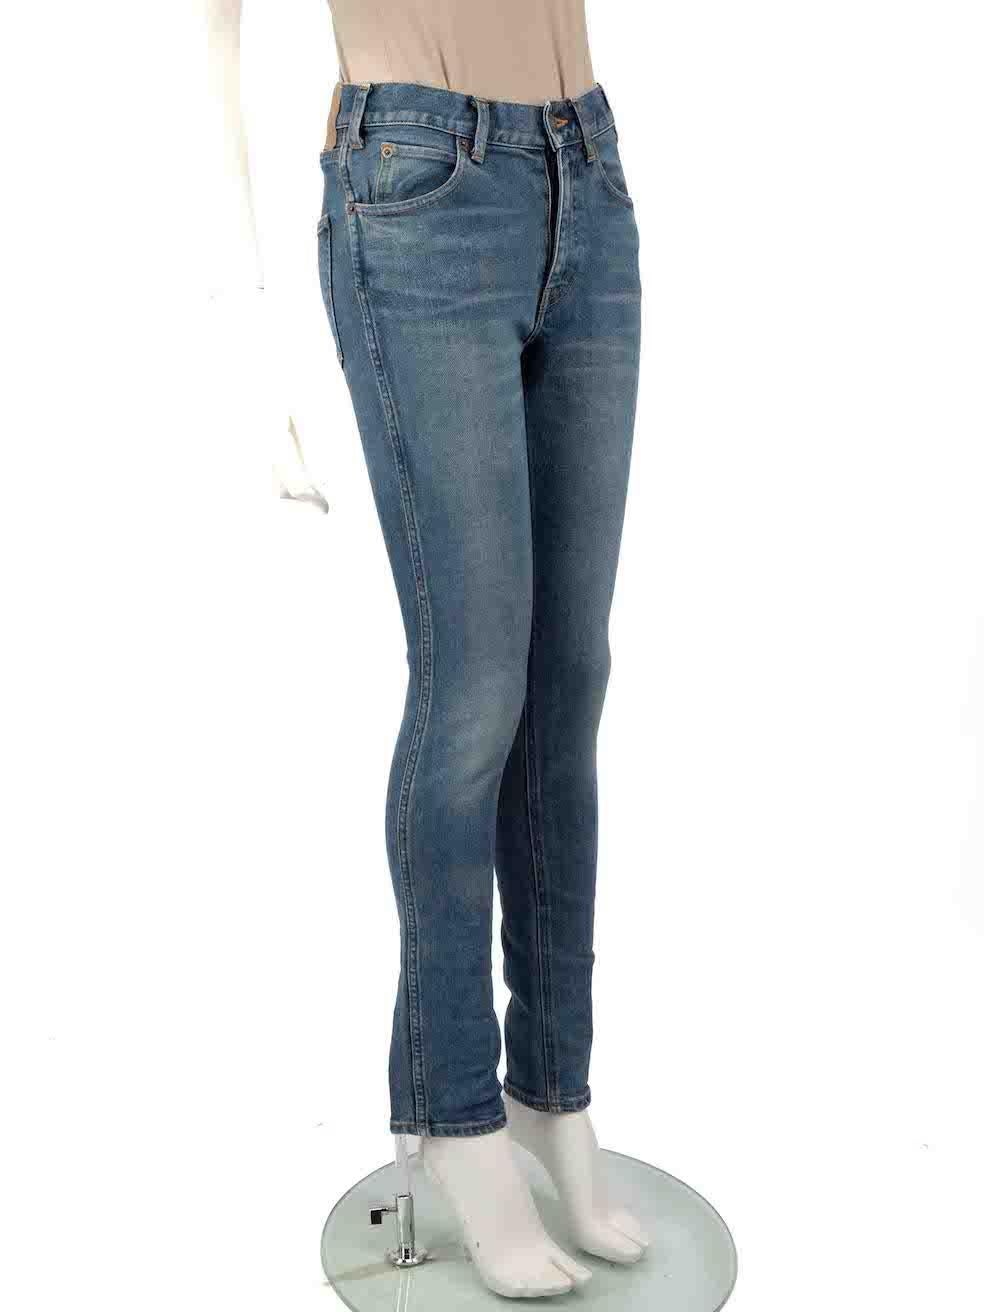 CONDITION is Very good. Minimal wear to jeans is evident. Minimal wear to the front is seen with a discolouration mark near the left pocket on this used Céline designer resale item.
 
 
 
 Details
 
 
 Blue
 
 Denim
 
 Jeans
 
 Skinny fit
 
 Mid